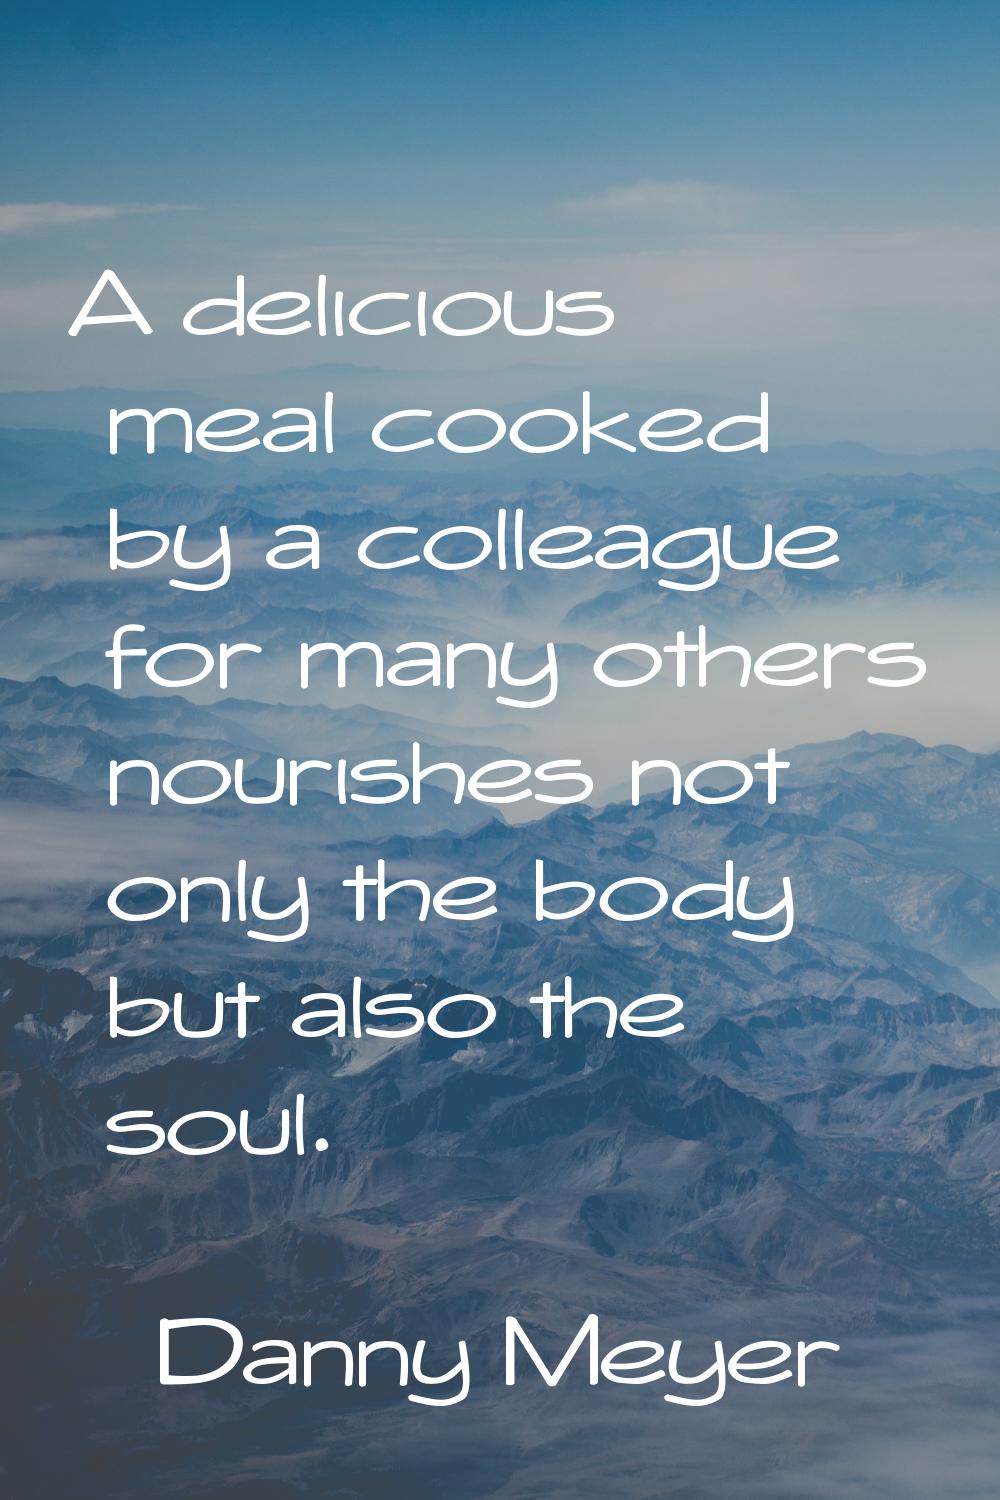 A delicious meal cooked by a colleague for many others nourishes not only the body but also the sou